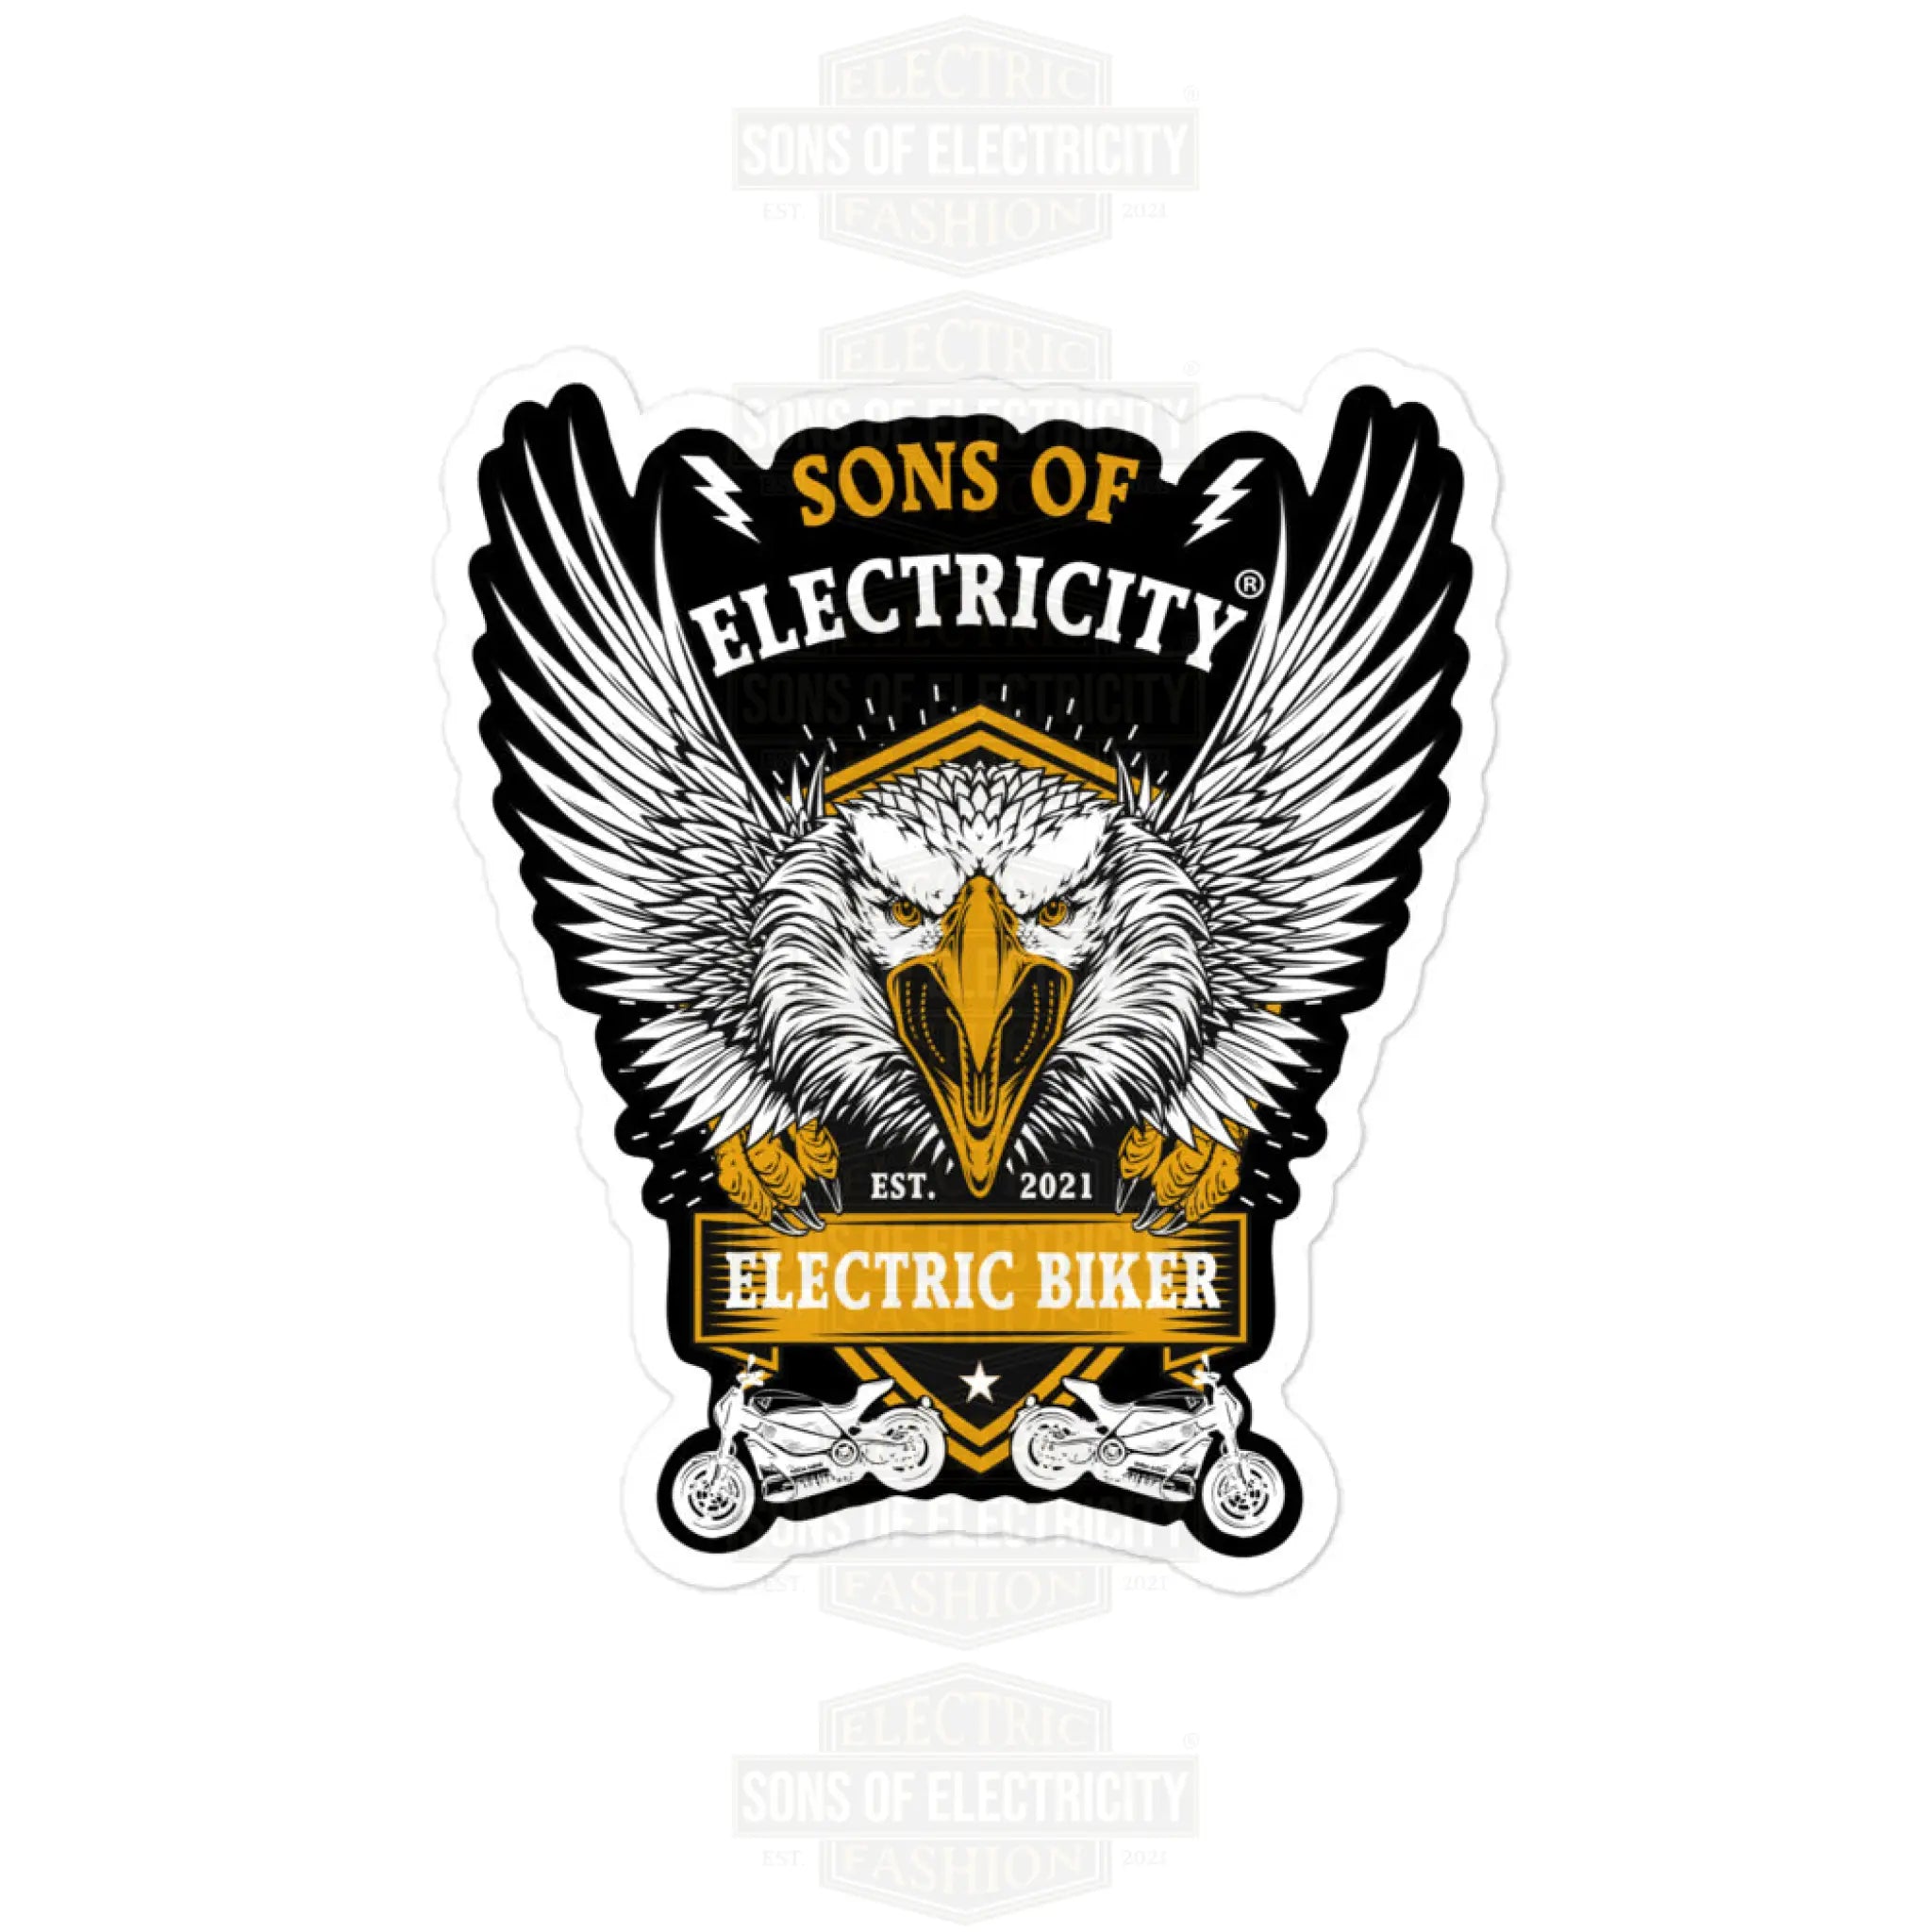 E-Motorrad Aufkleber: SONS OF ELECTRICITY E-Motorcycle Fans - SONS